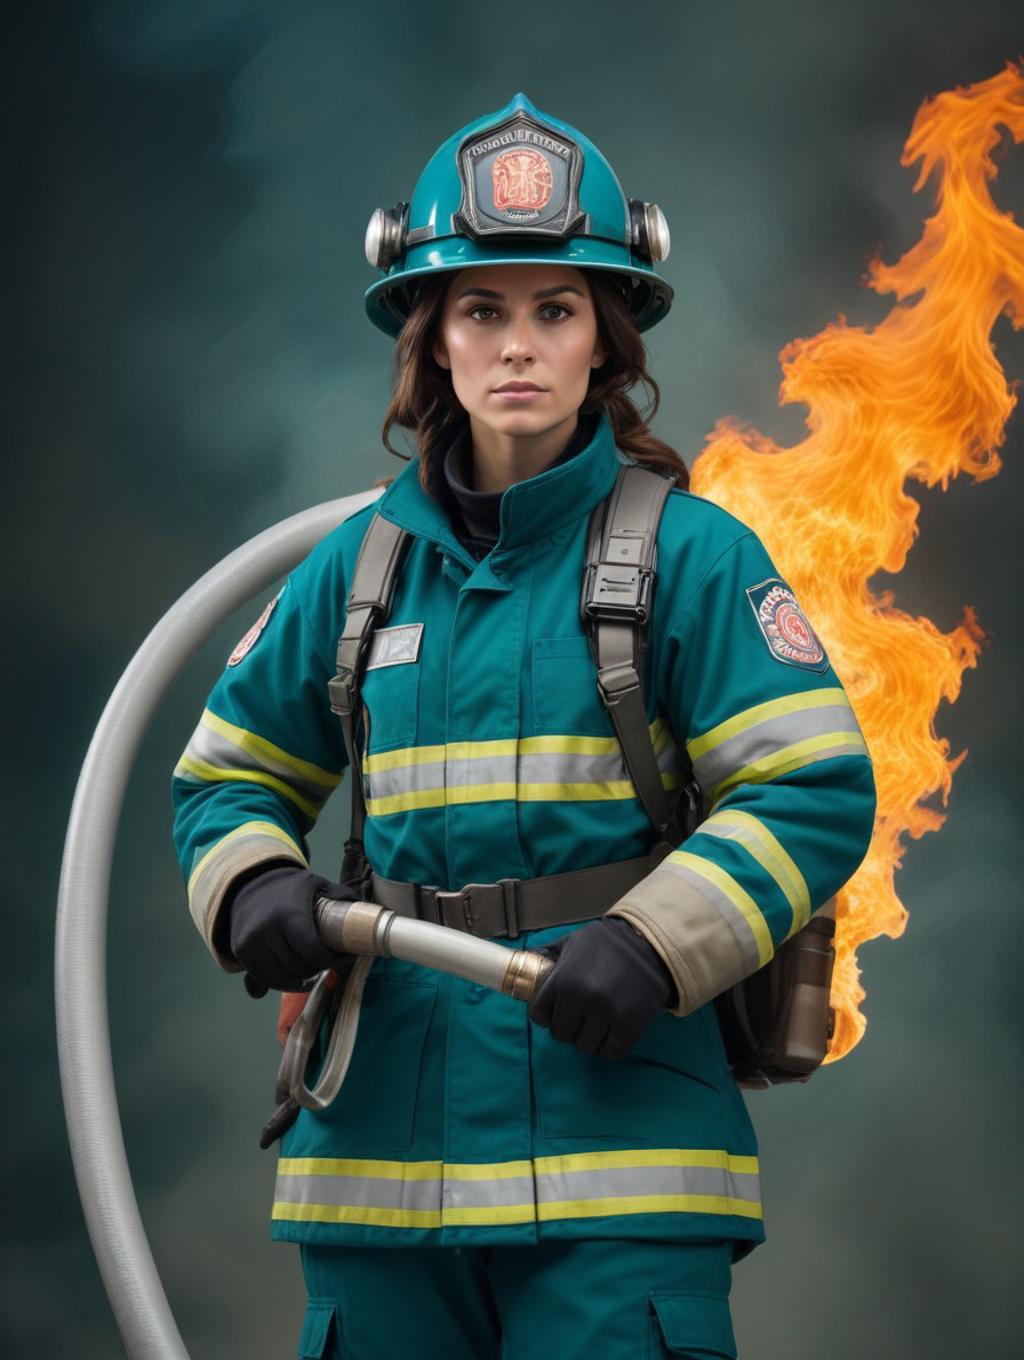 Fire Fighters Women: Portrait Photography & Wall Frames-Theme:1